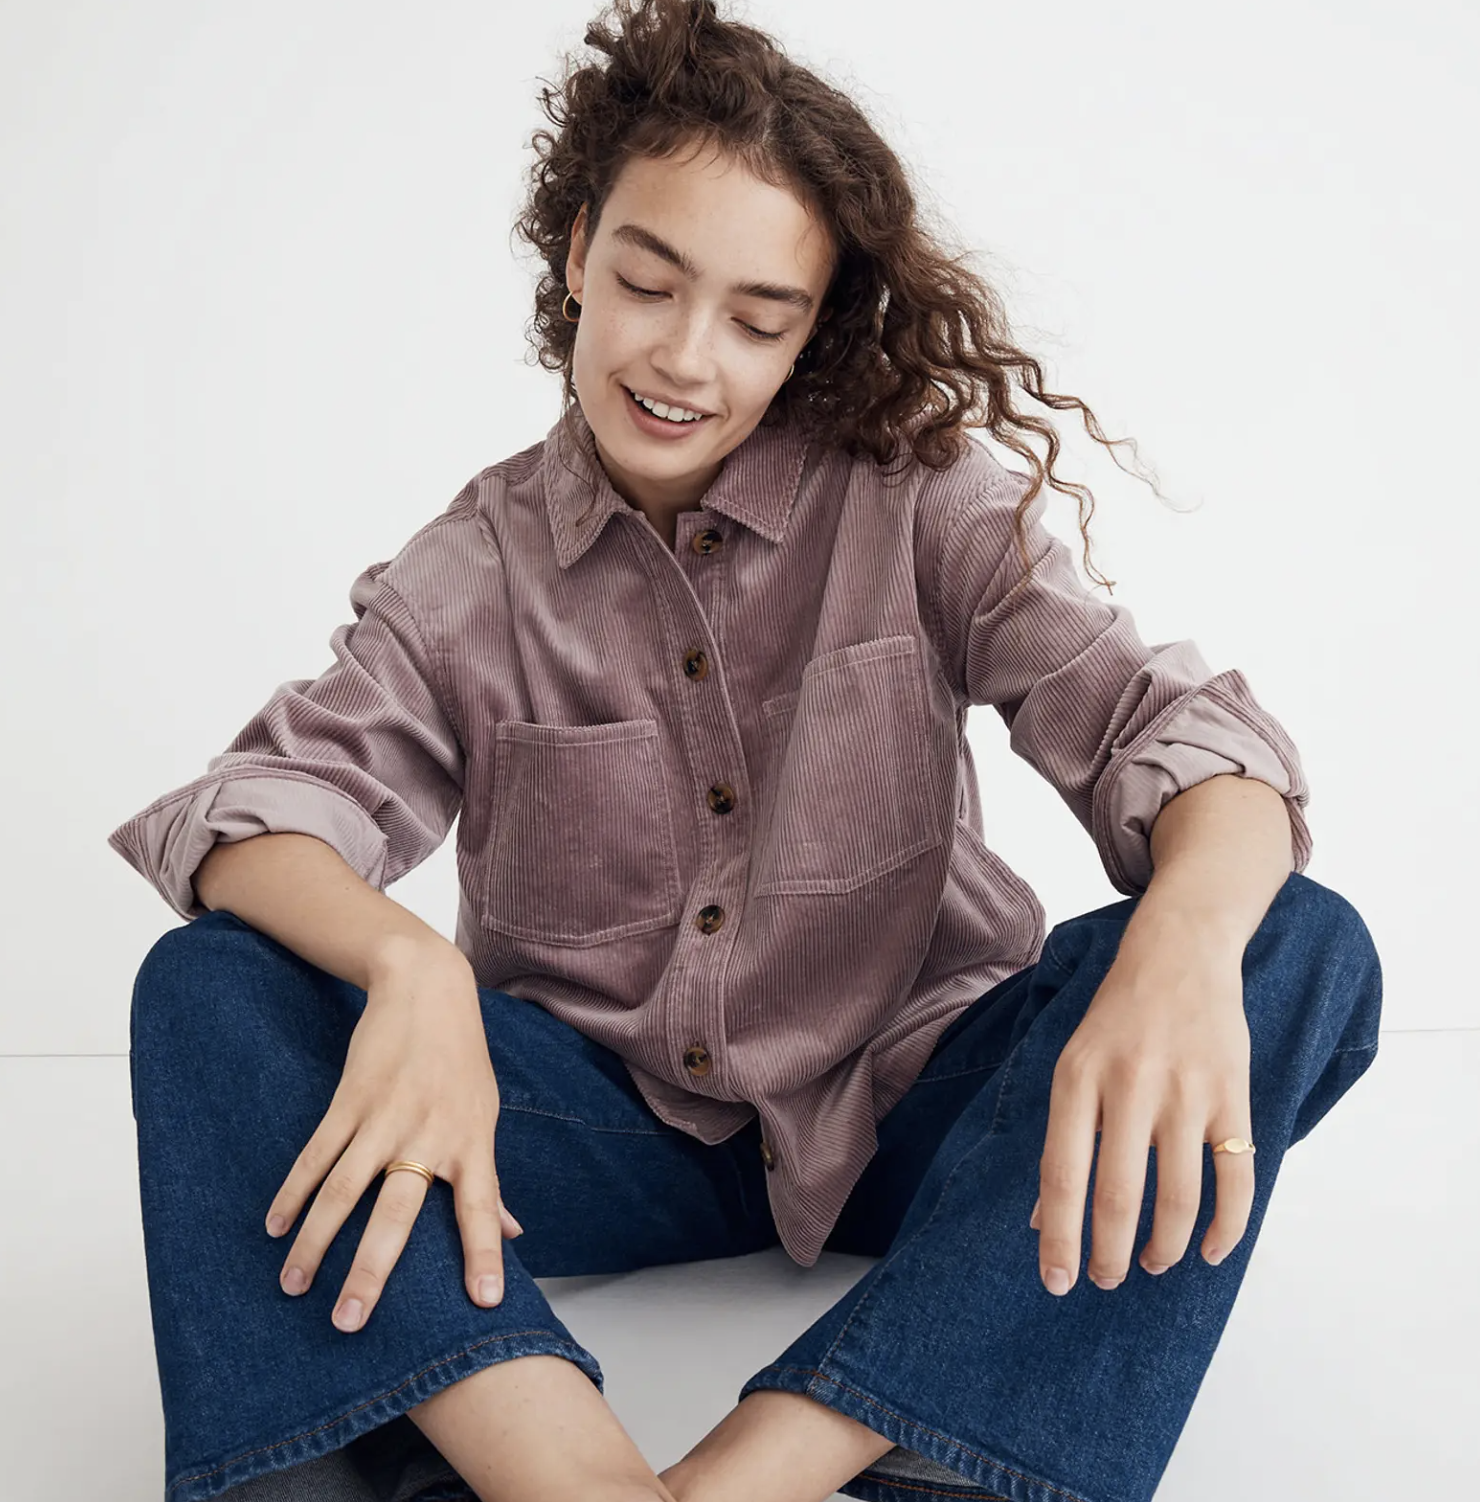 A person wearing the top with jeans